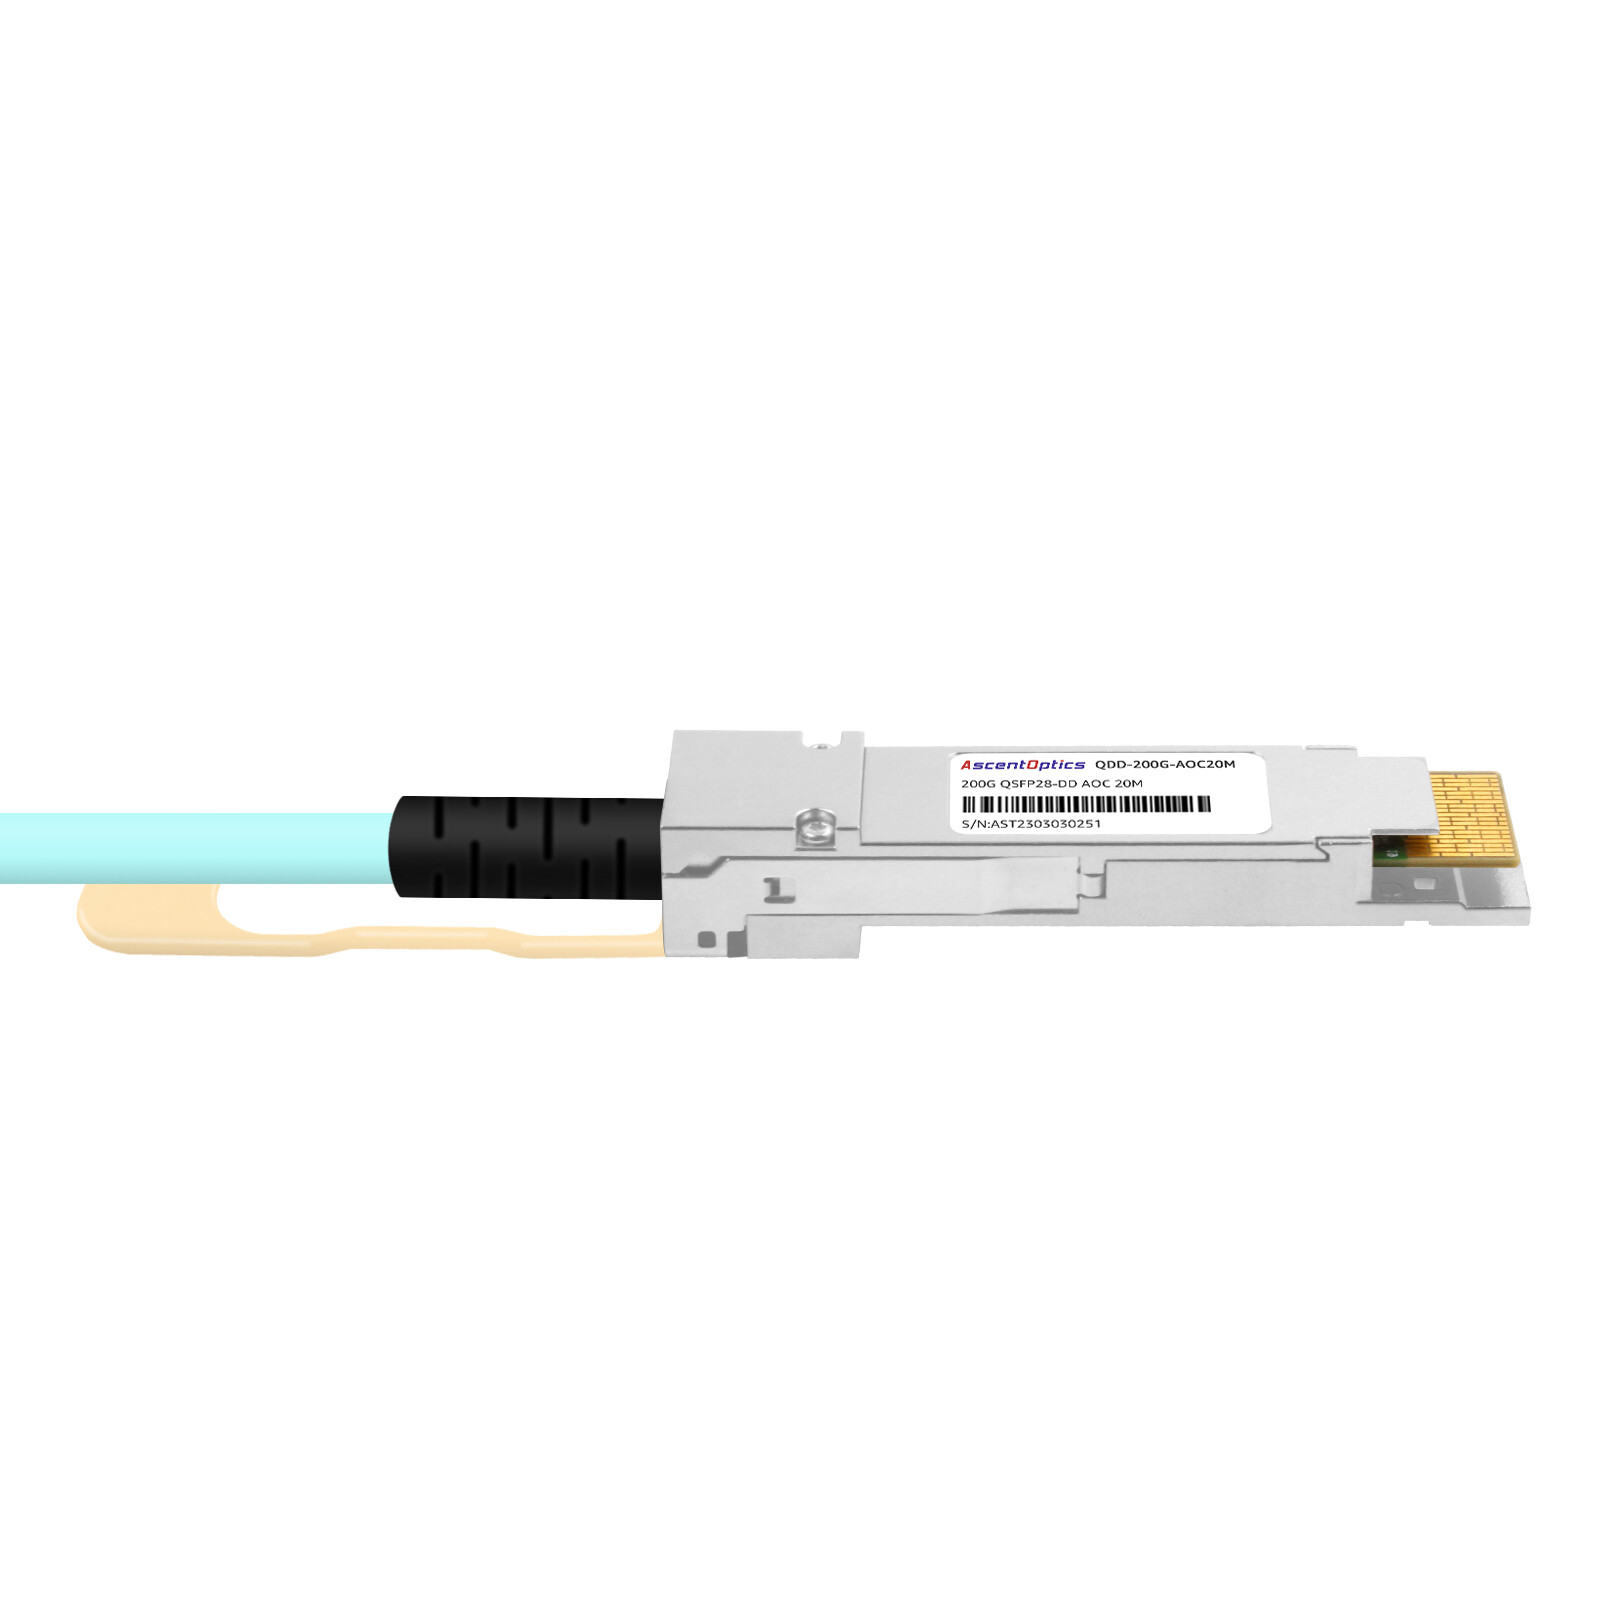 200G QSFP28-DD Active Optical Cable,20 Meters